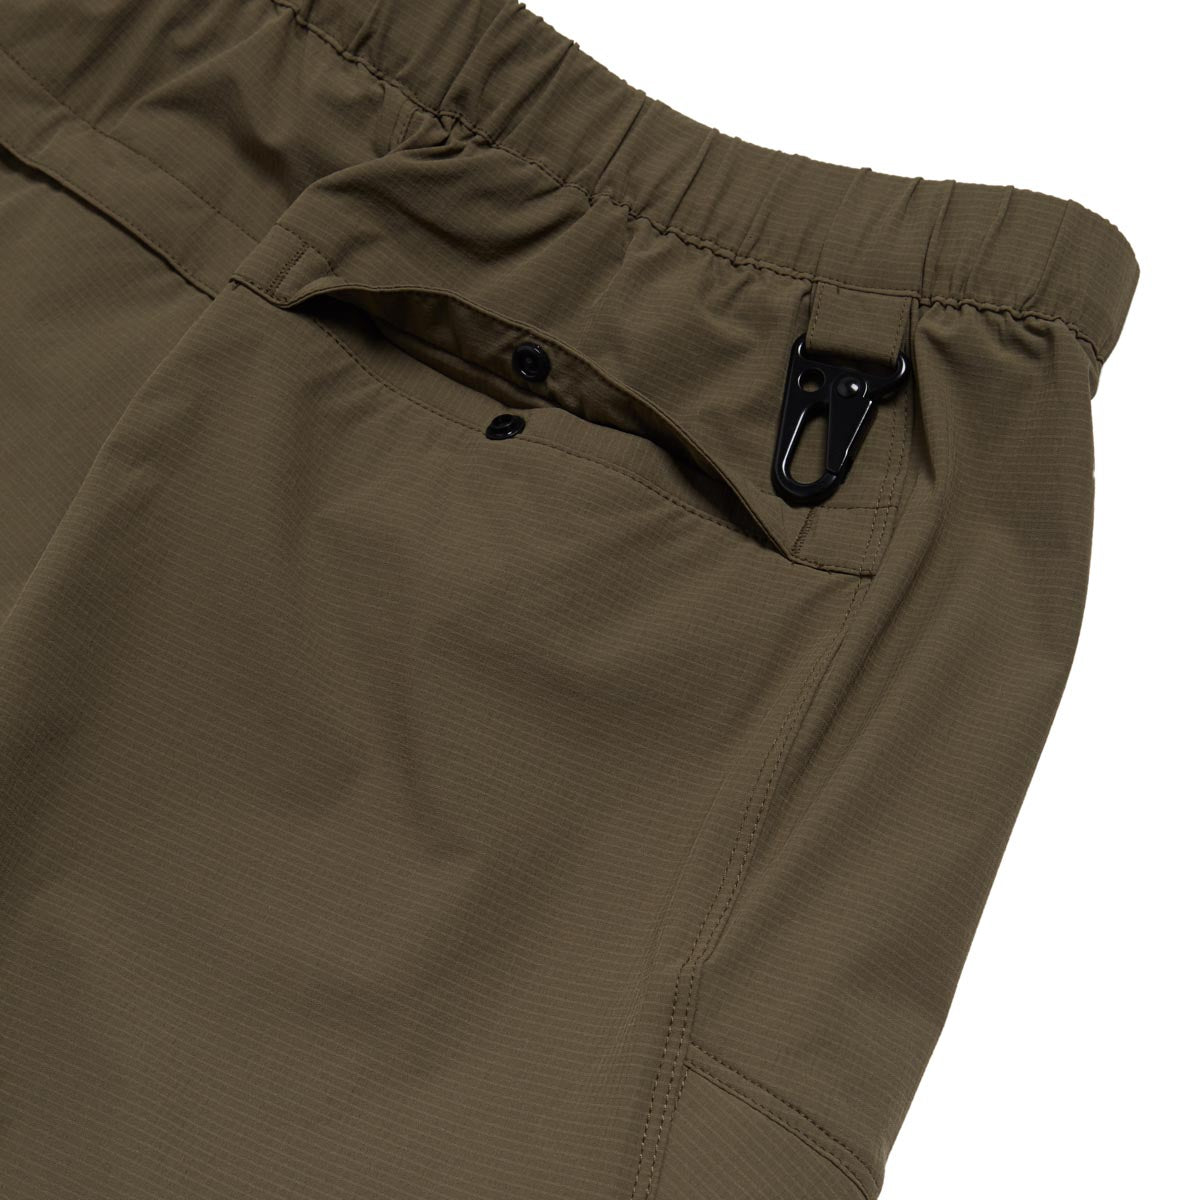 Kennedy The Ascension Cargo Pants - Wet Sand image 5